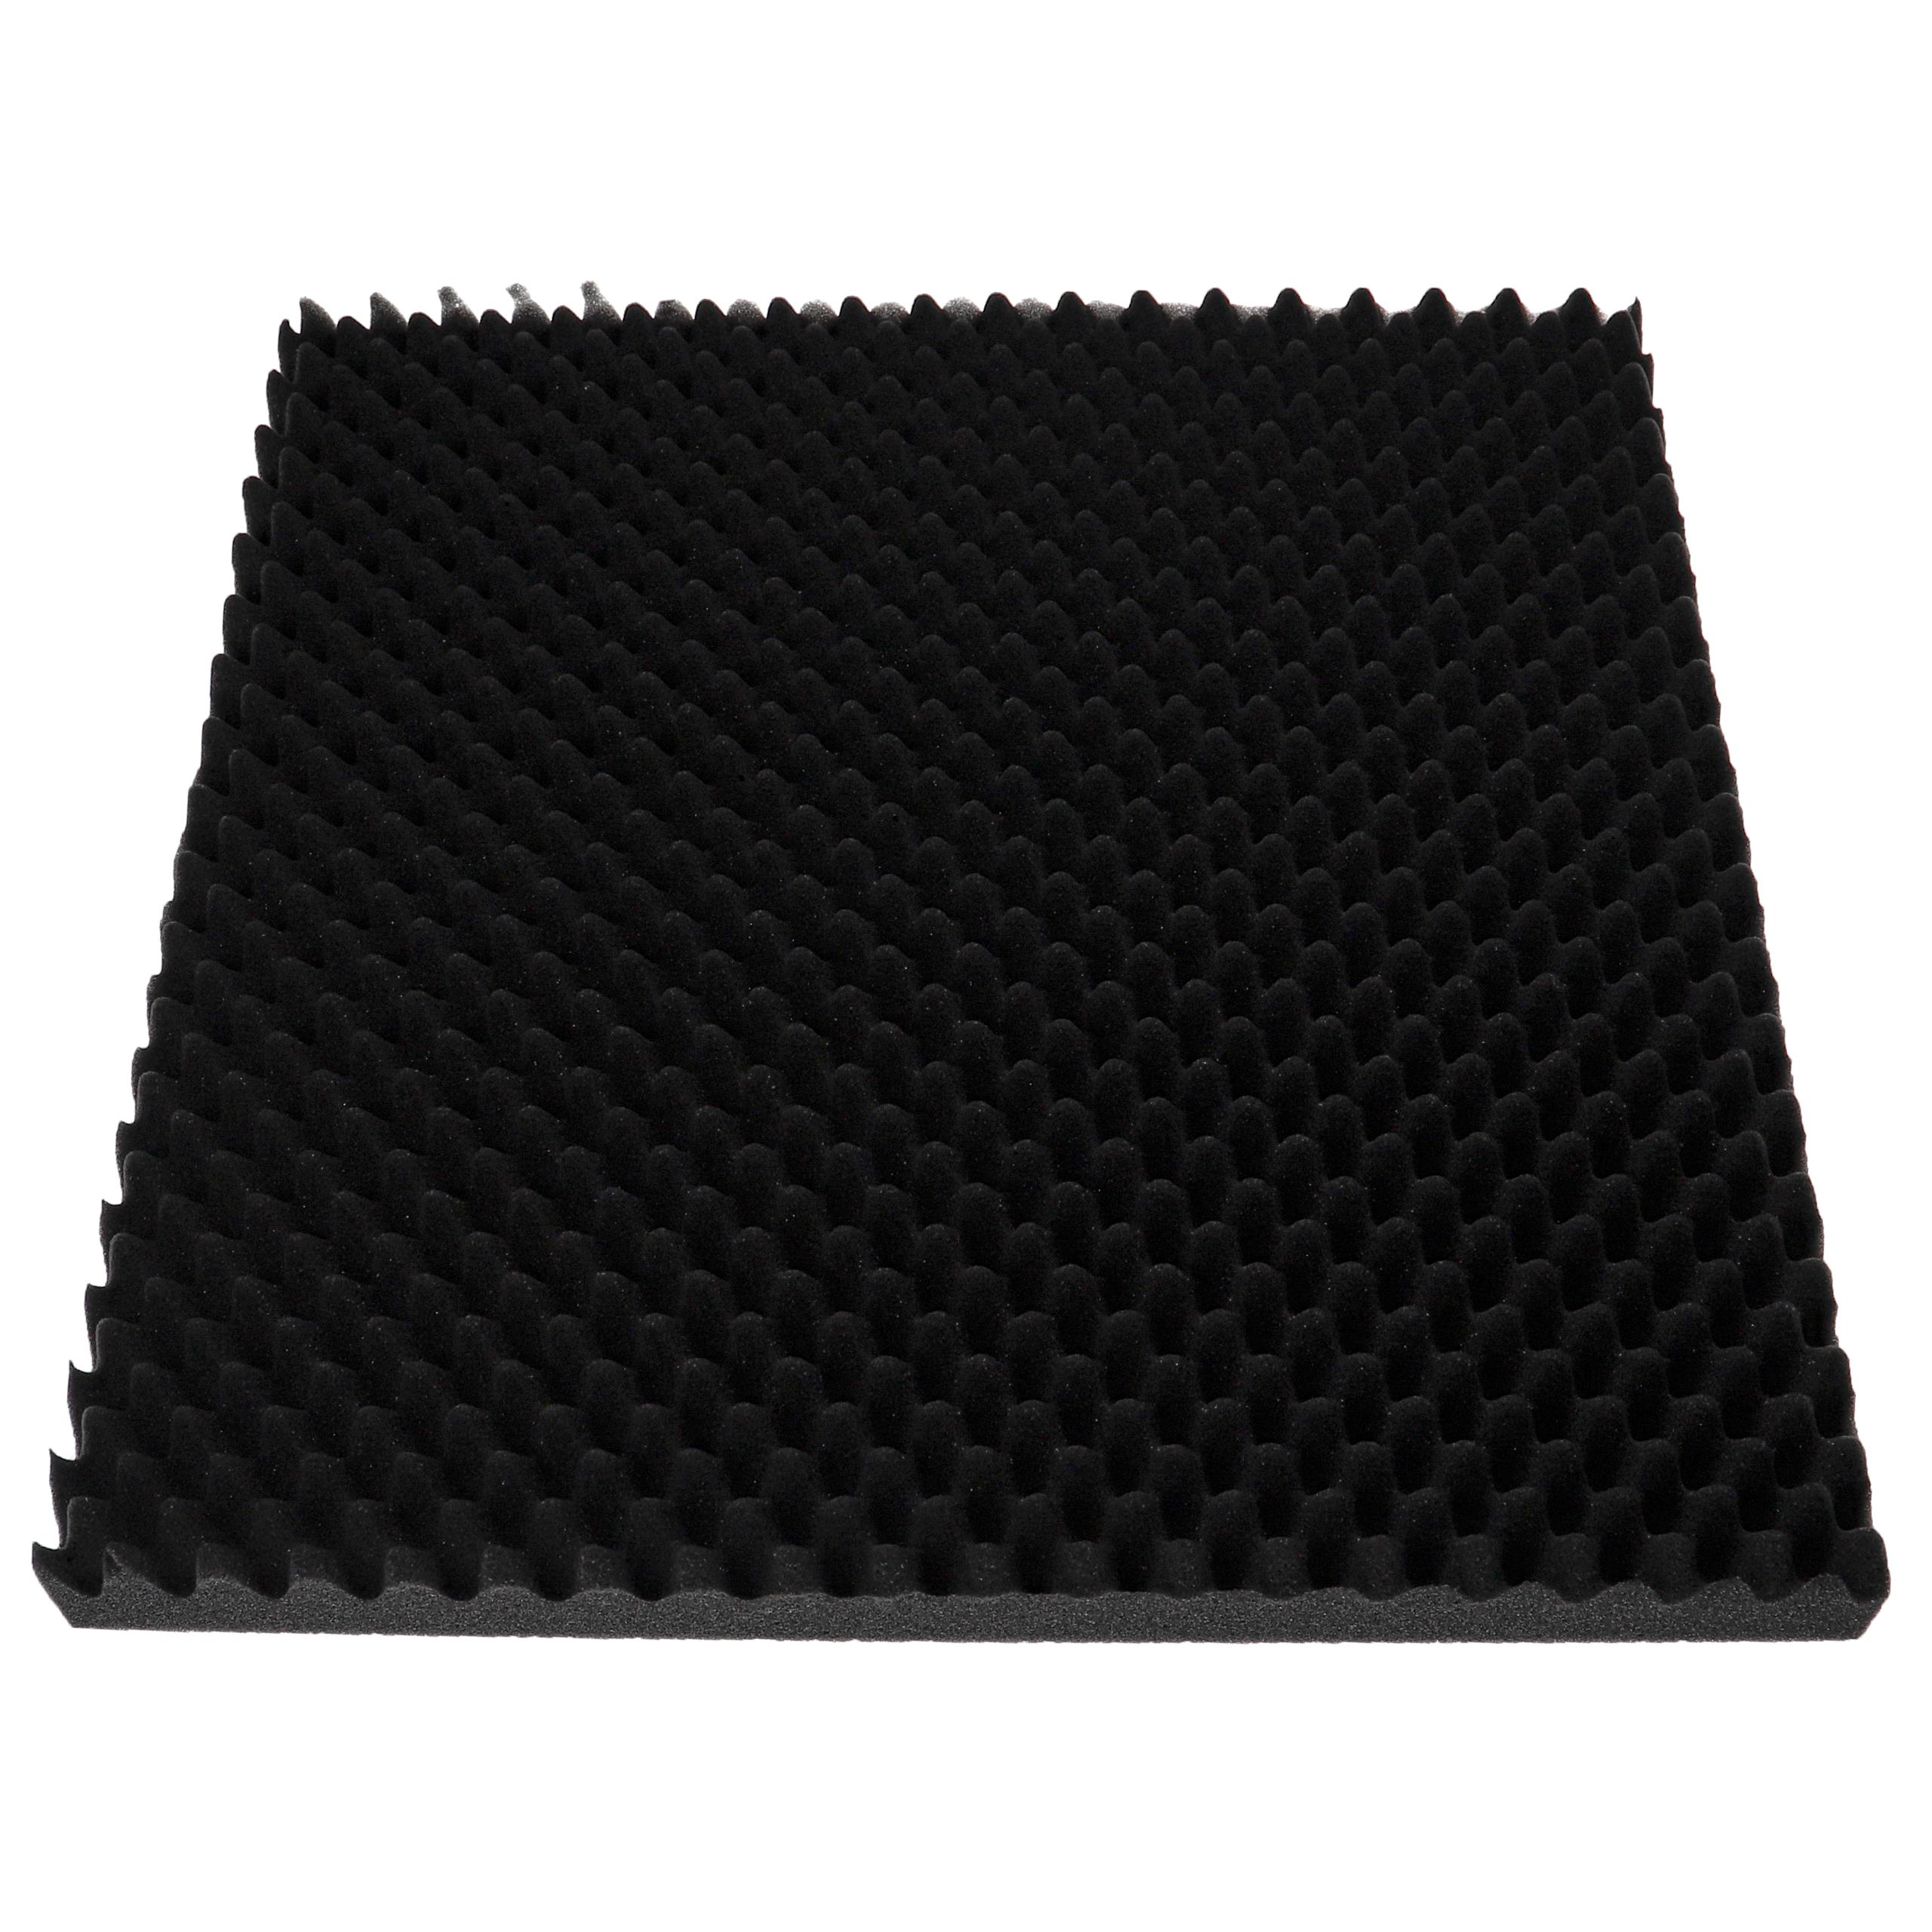 vhbw Foam Insert for Toolbox -nap foam, with Soundproofing Black